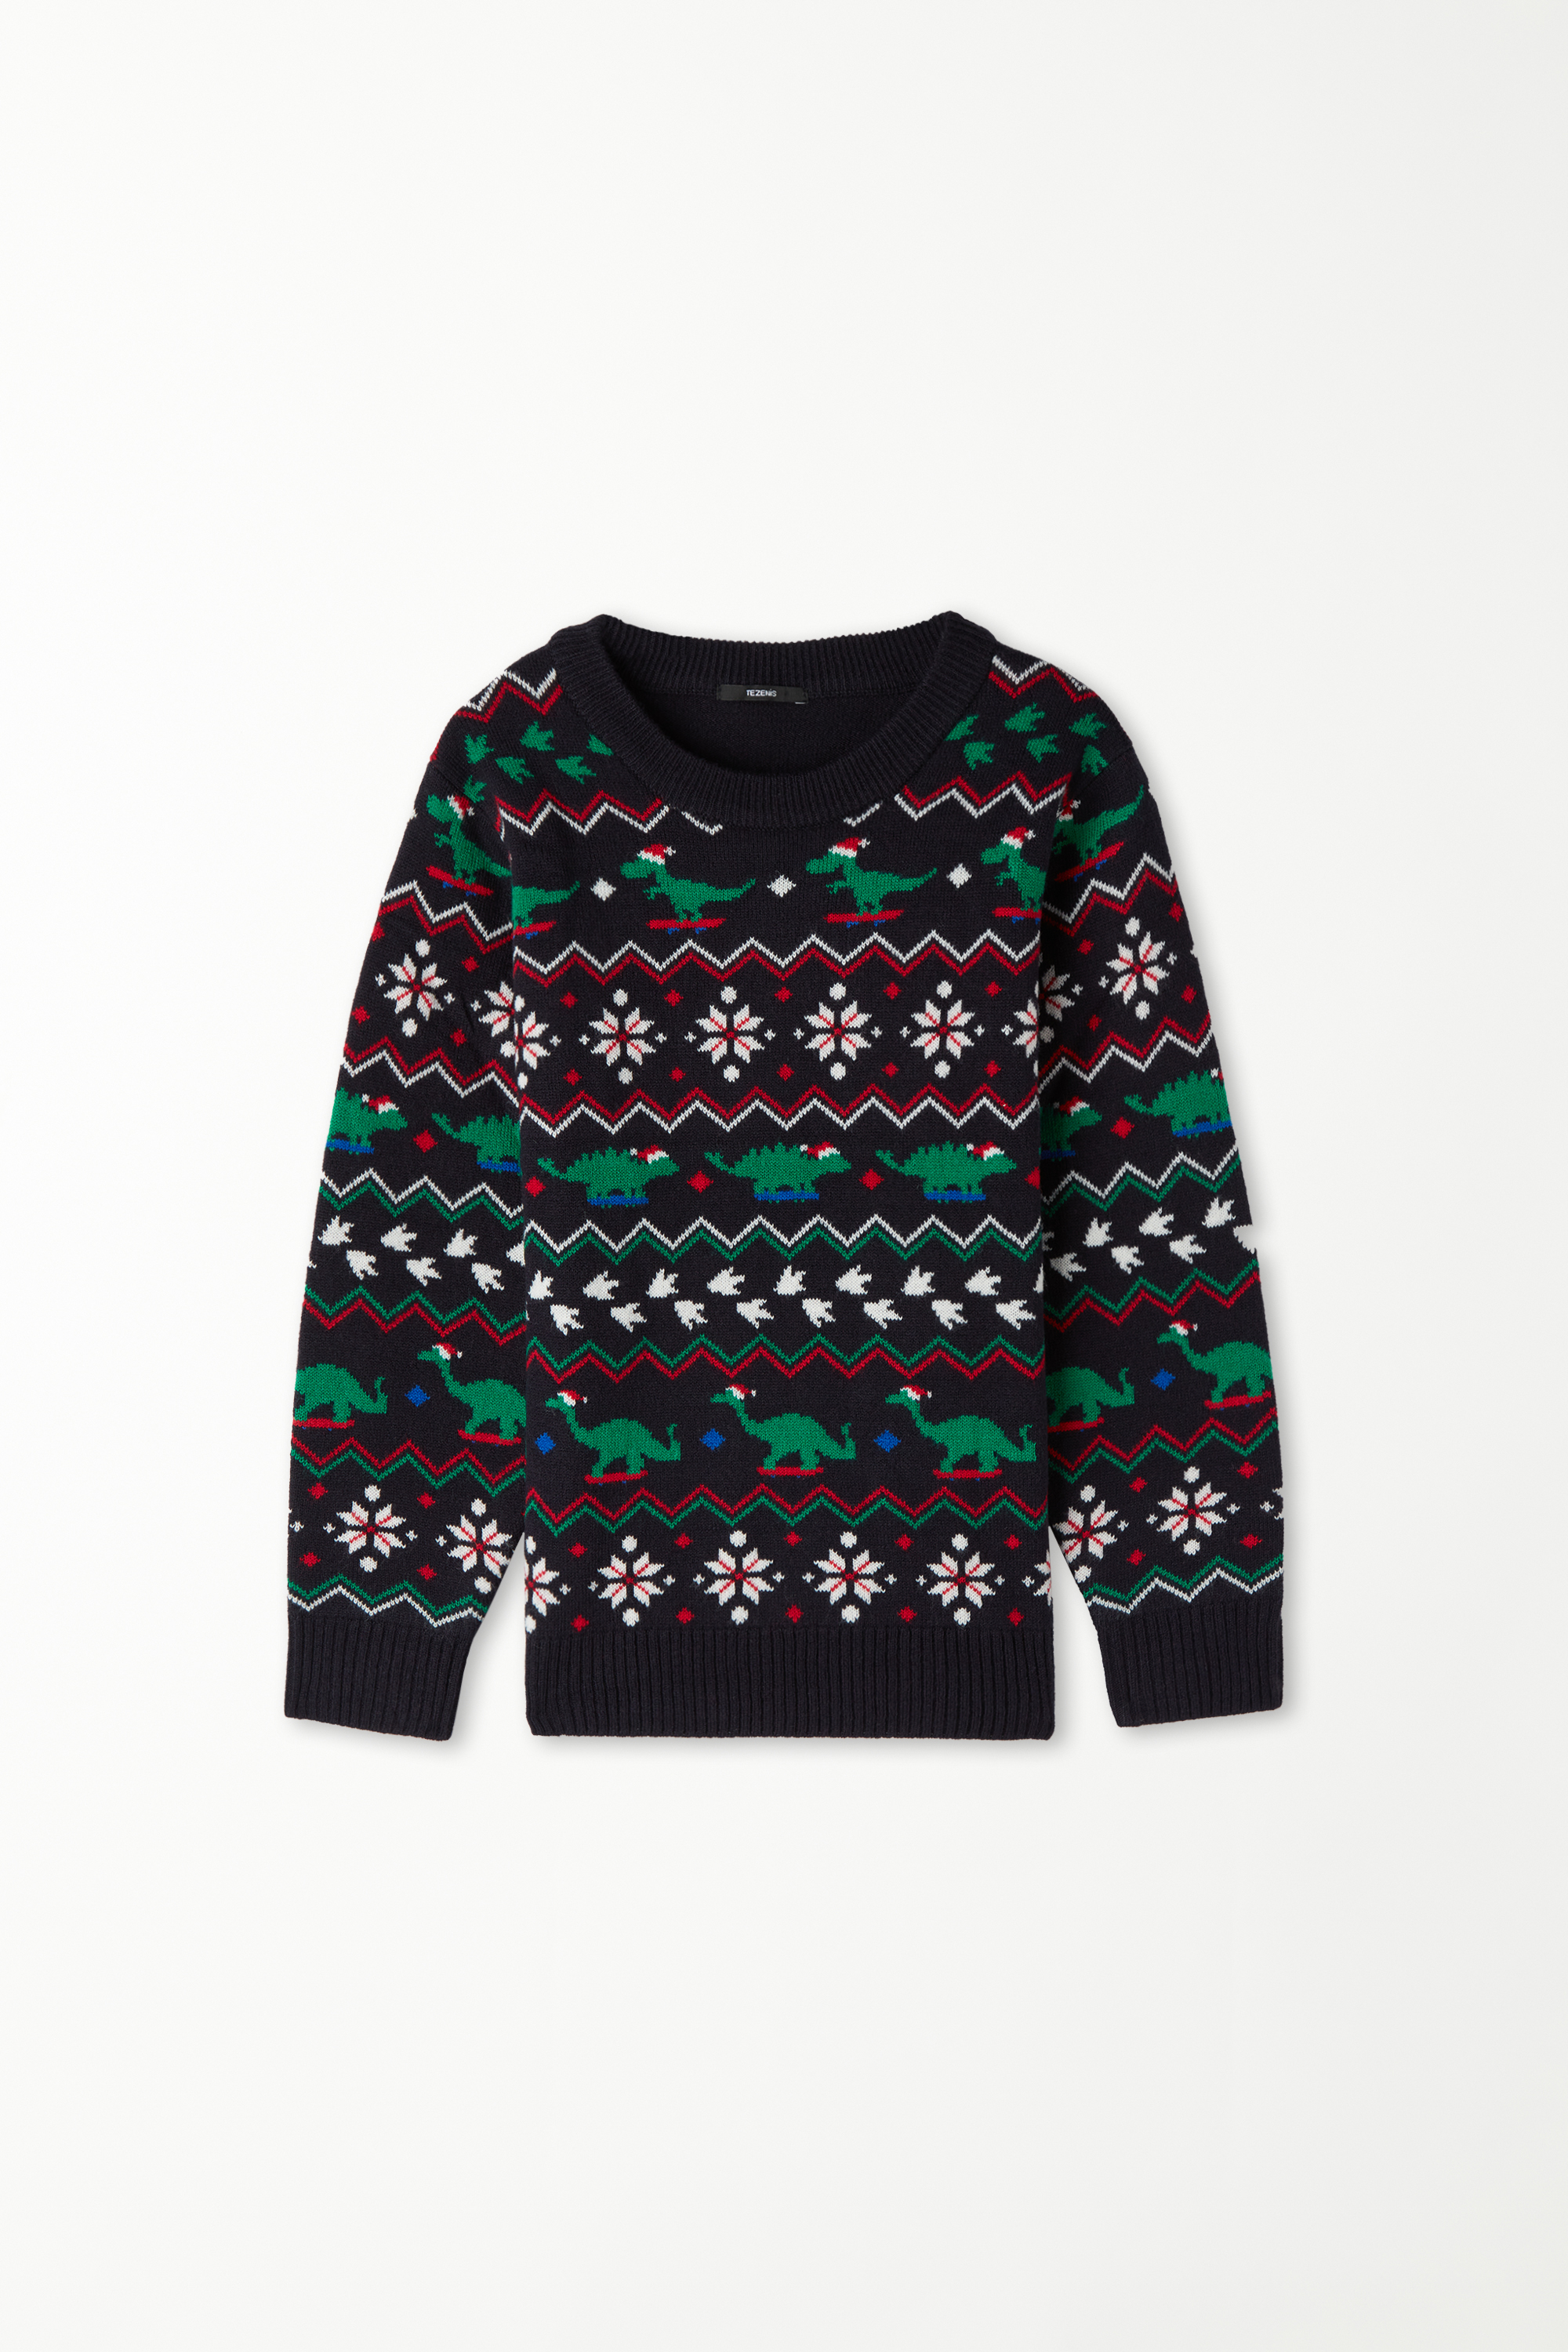 Boys’ Heavy Long-Sleeved Jersey with Christmas Print